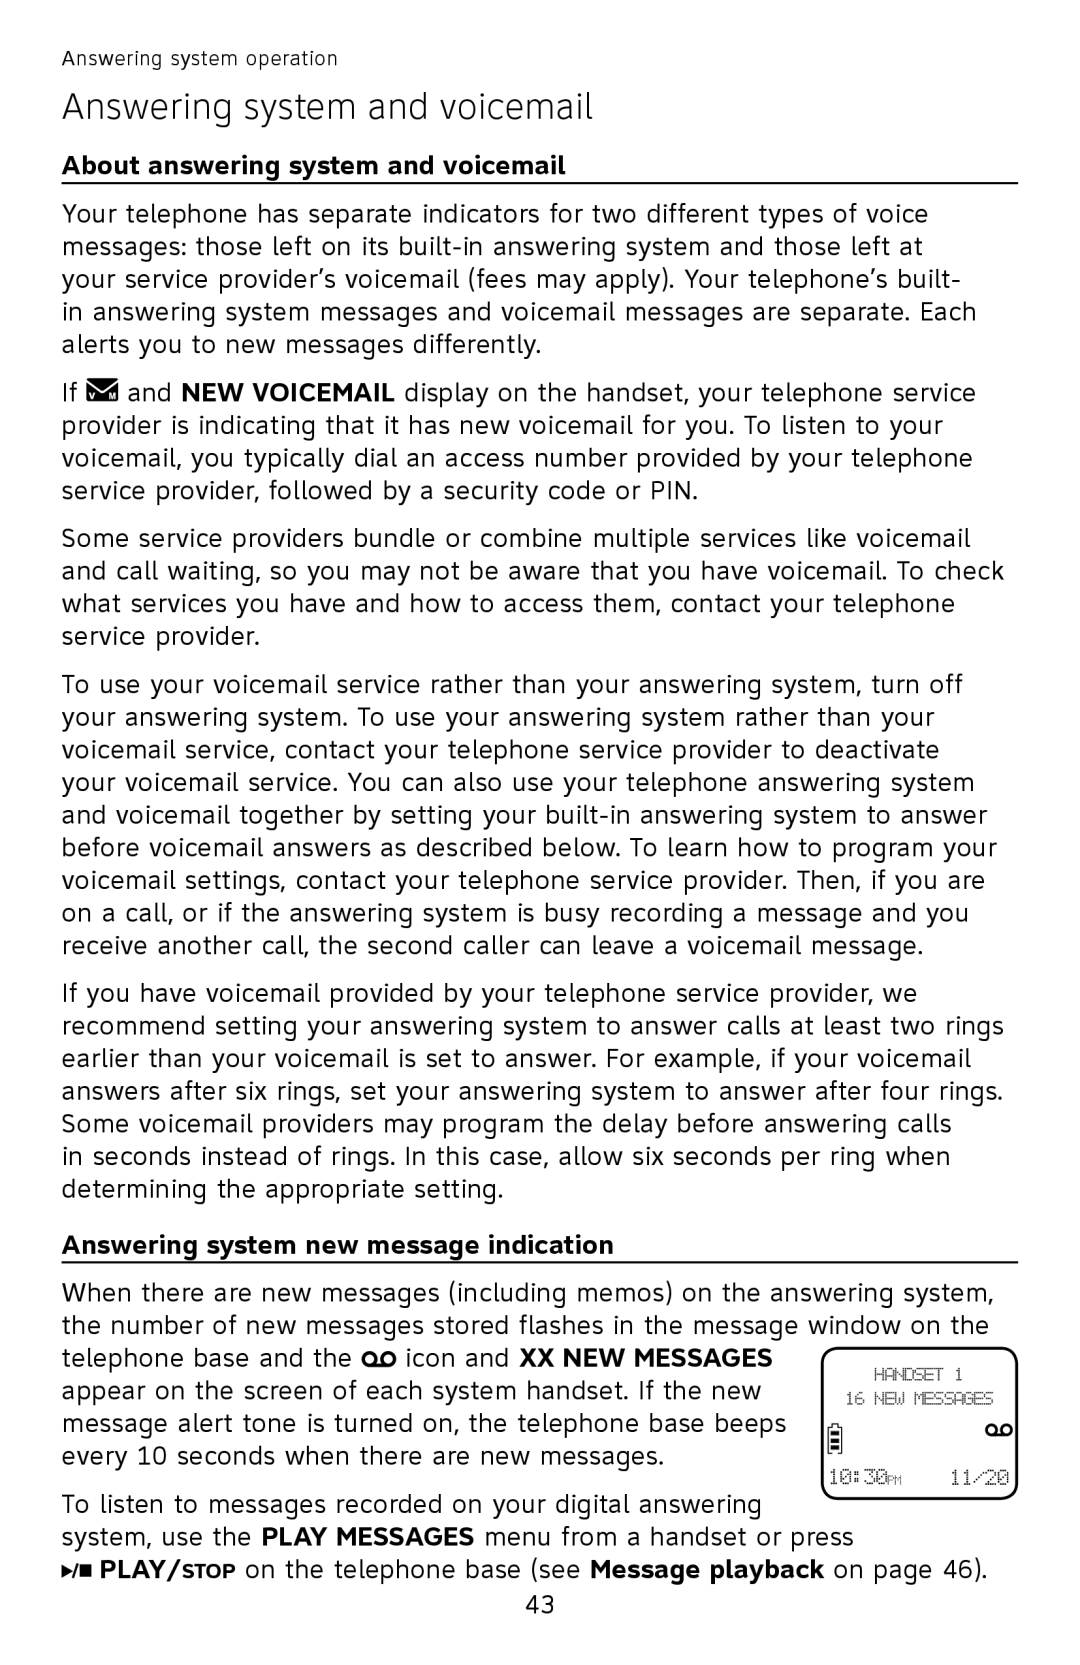 AT&T EL52350 Answering system and voicemail, About answering system and voicemail, Answering system new message indication 